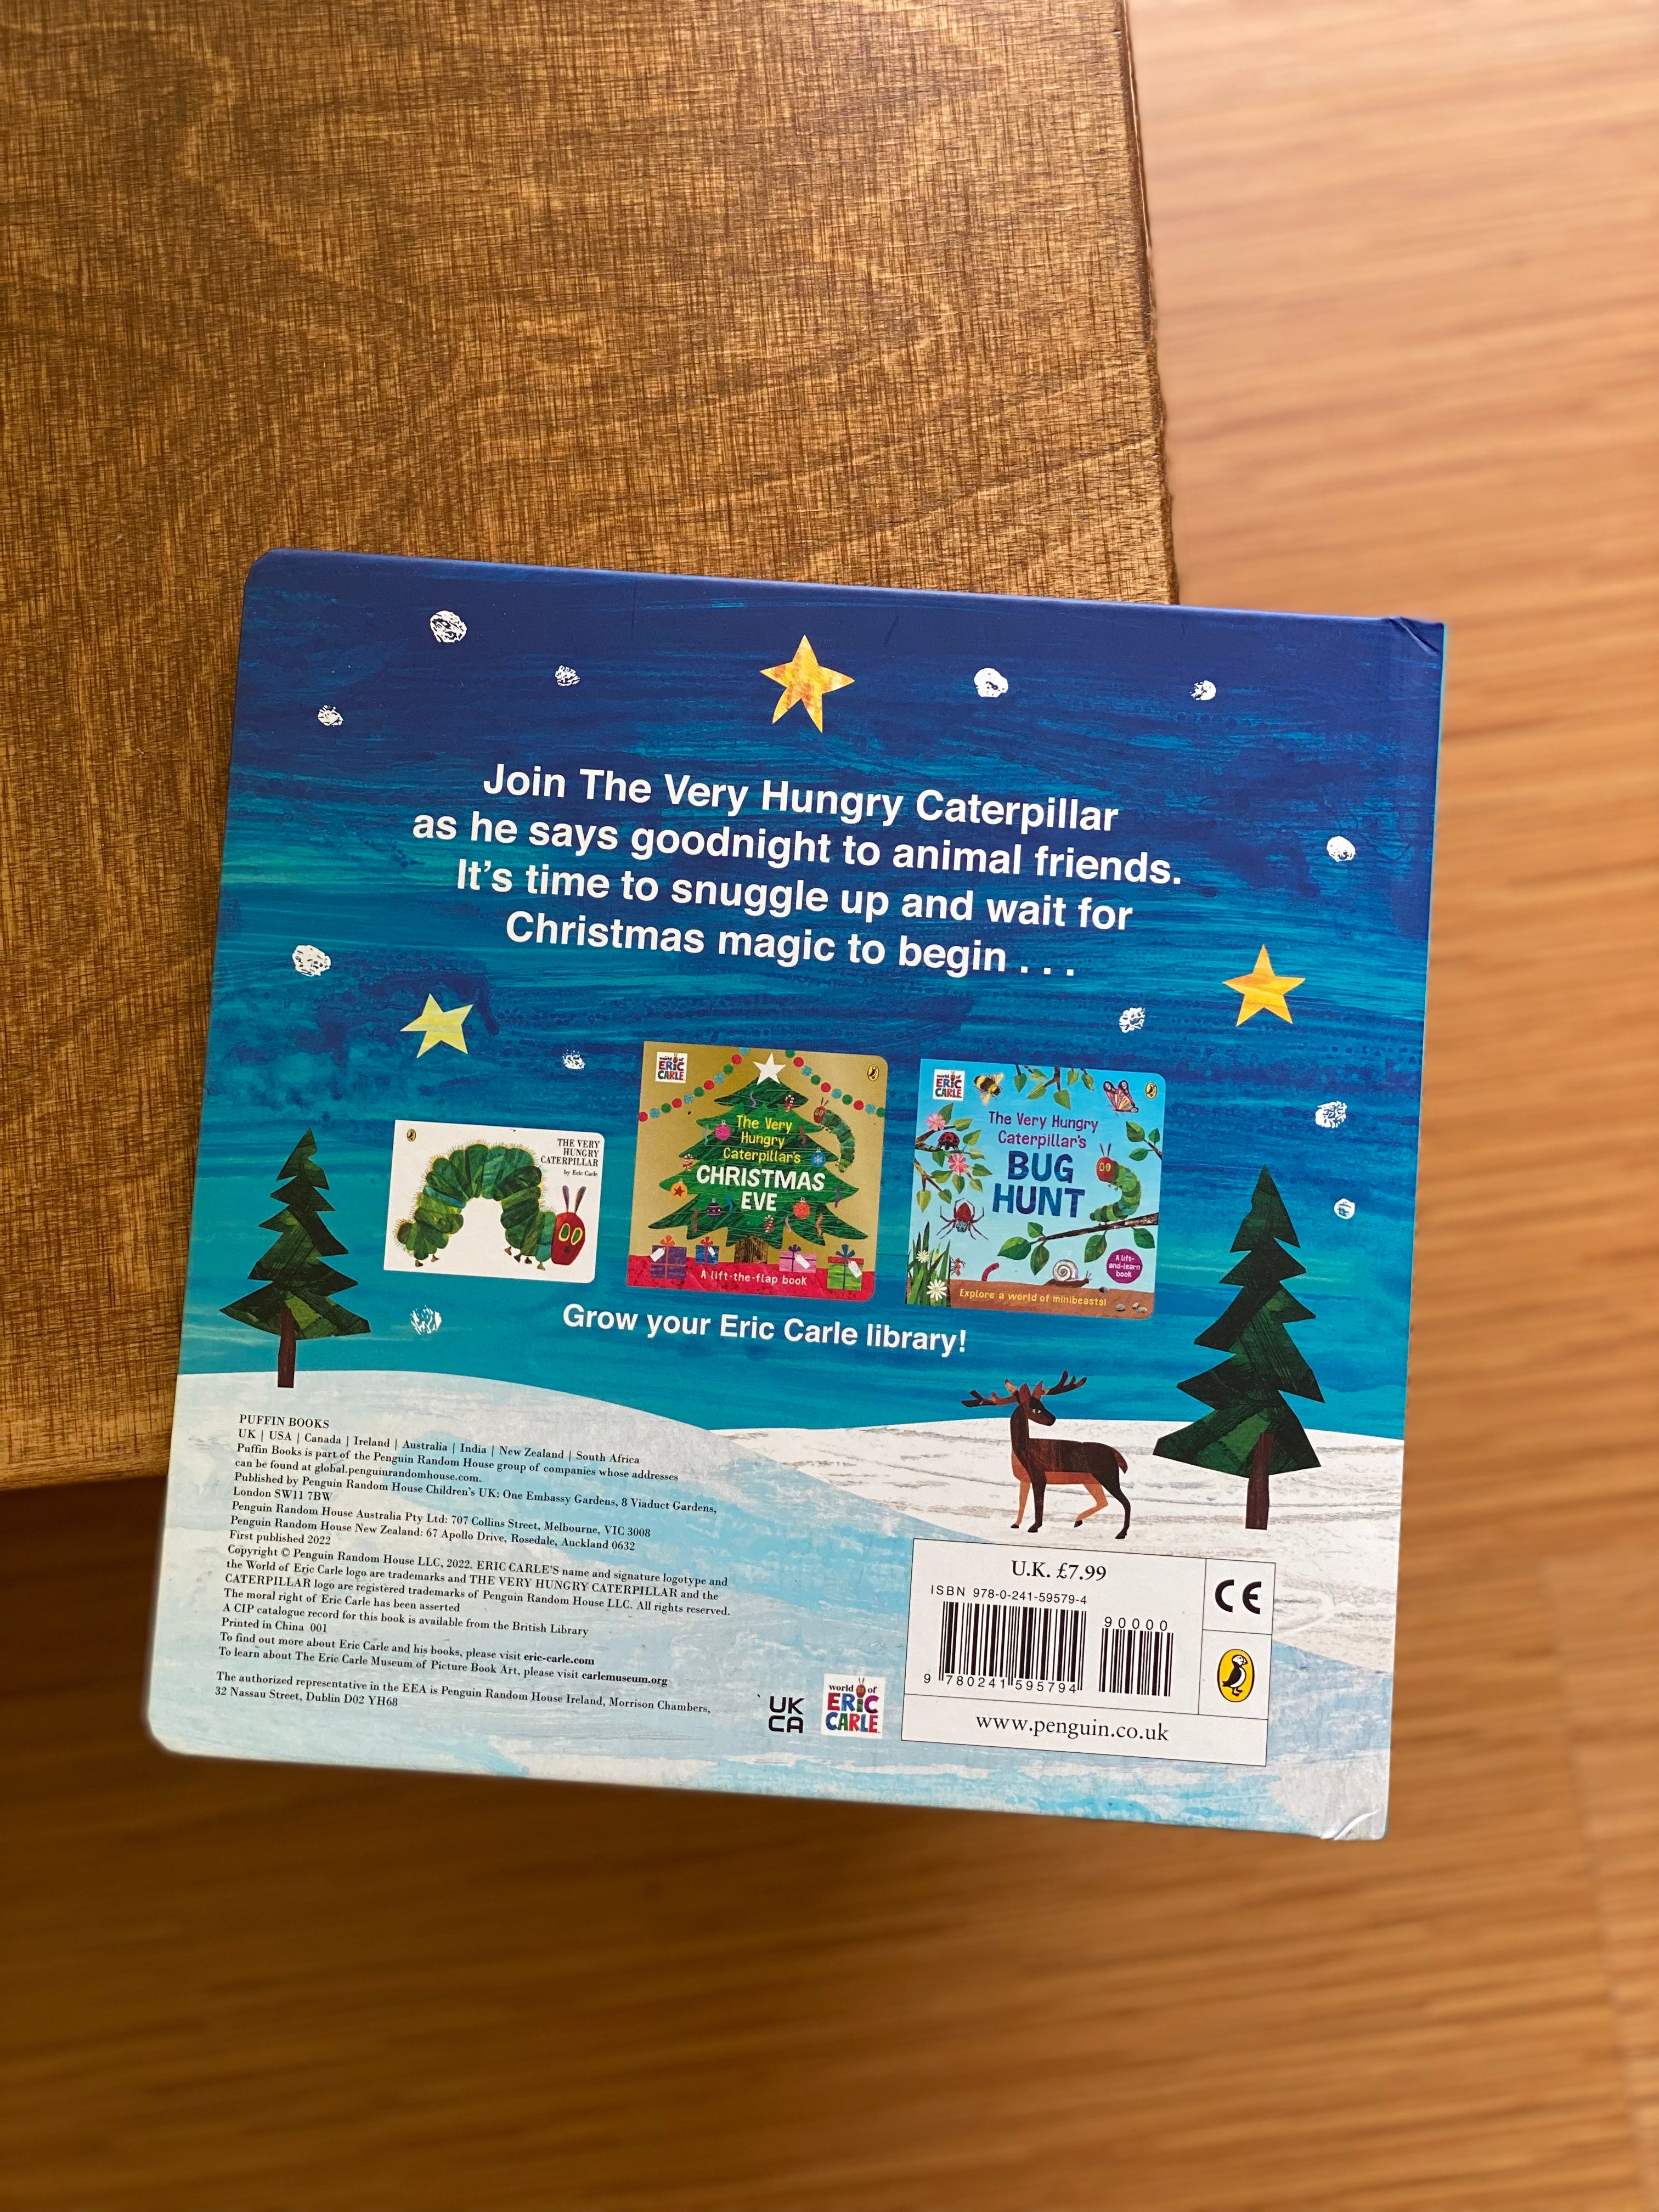 The Very Hungry Caterpillar's Night Before Christmas A lift-the-flap book